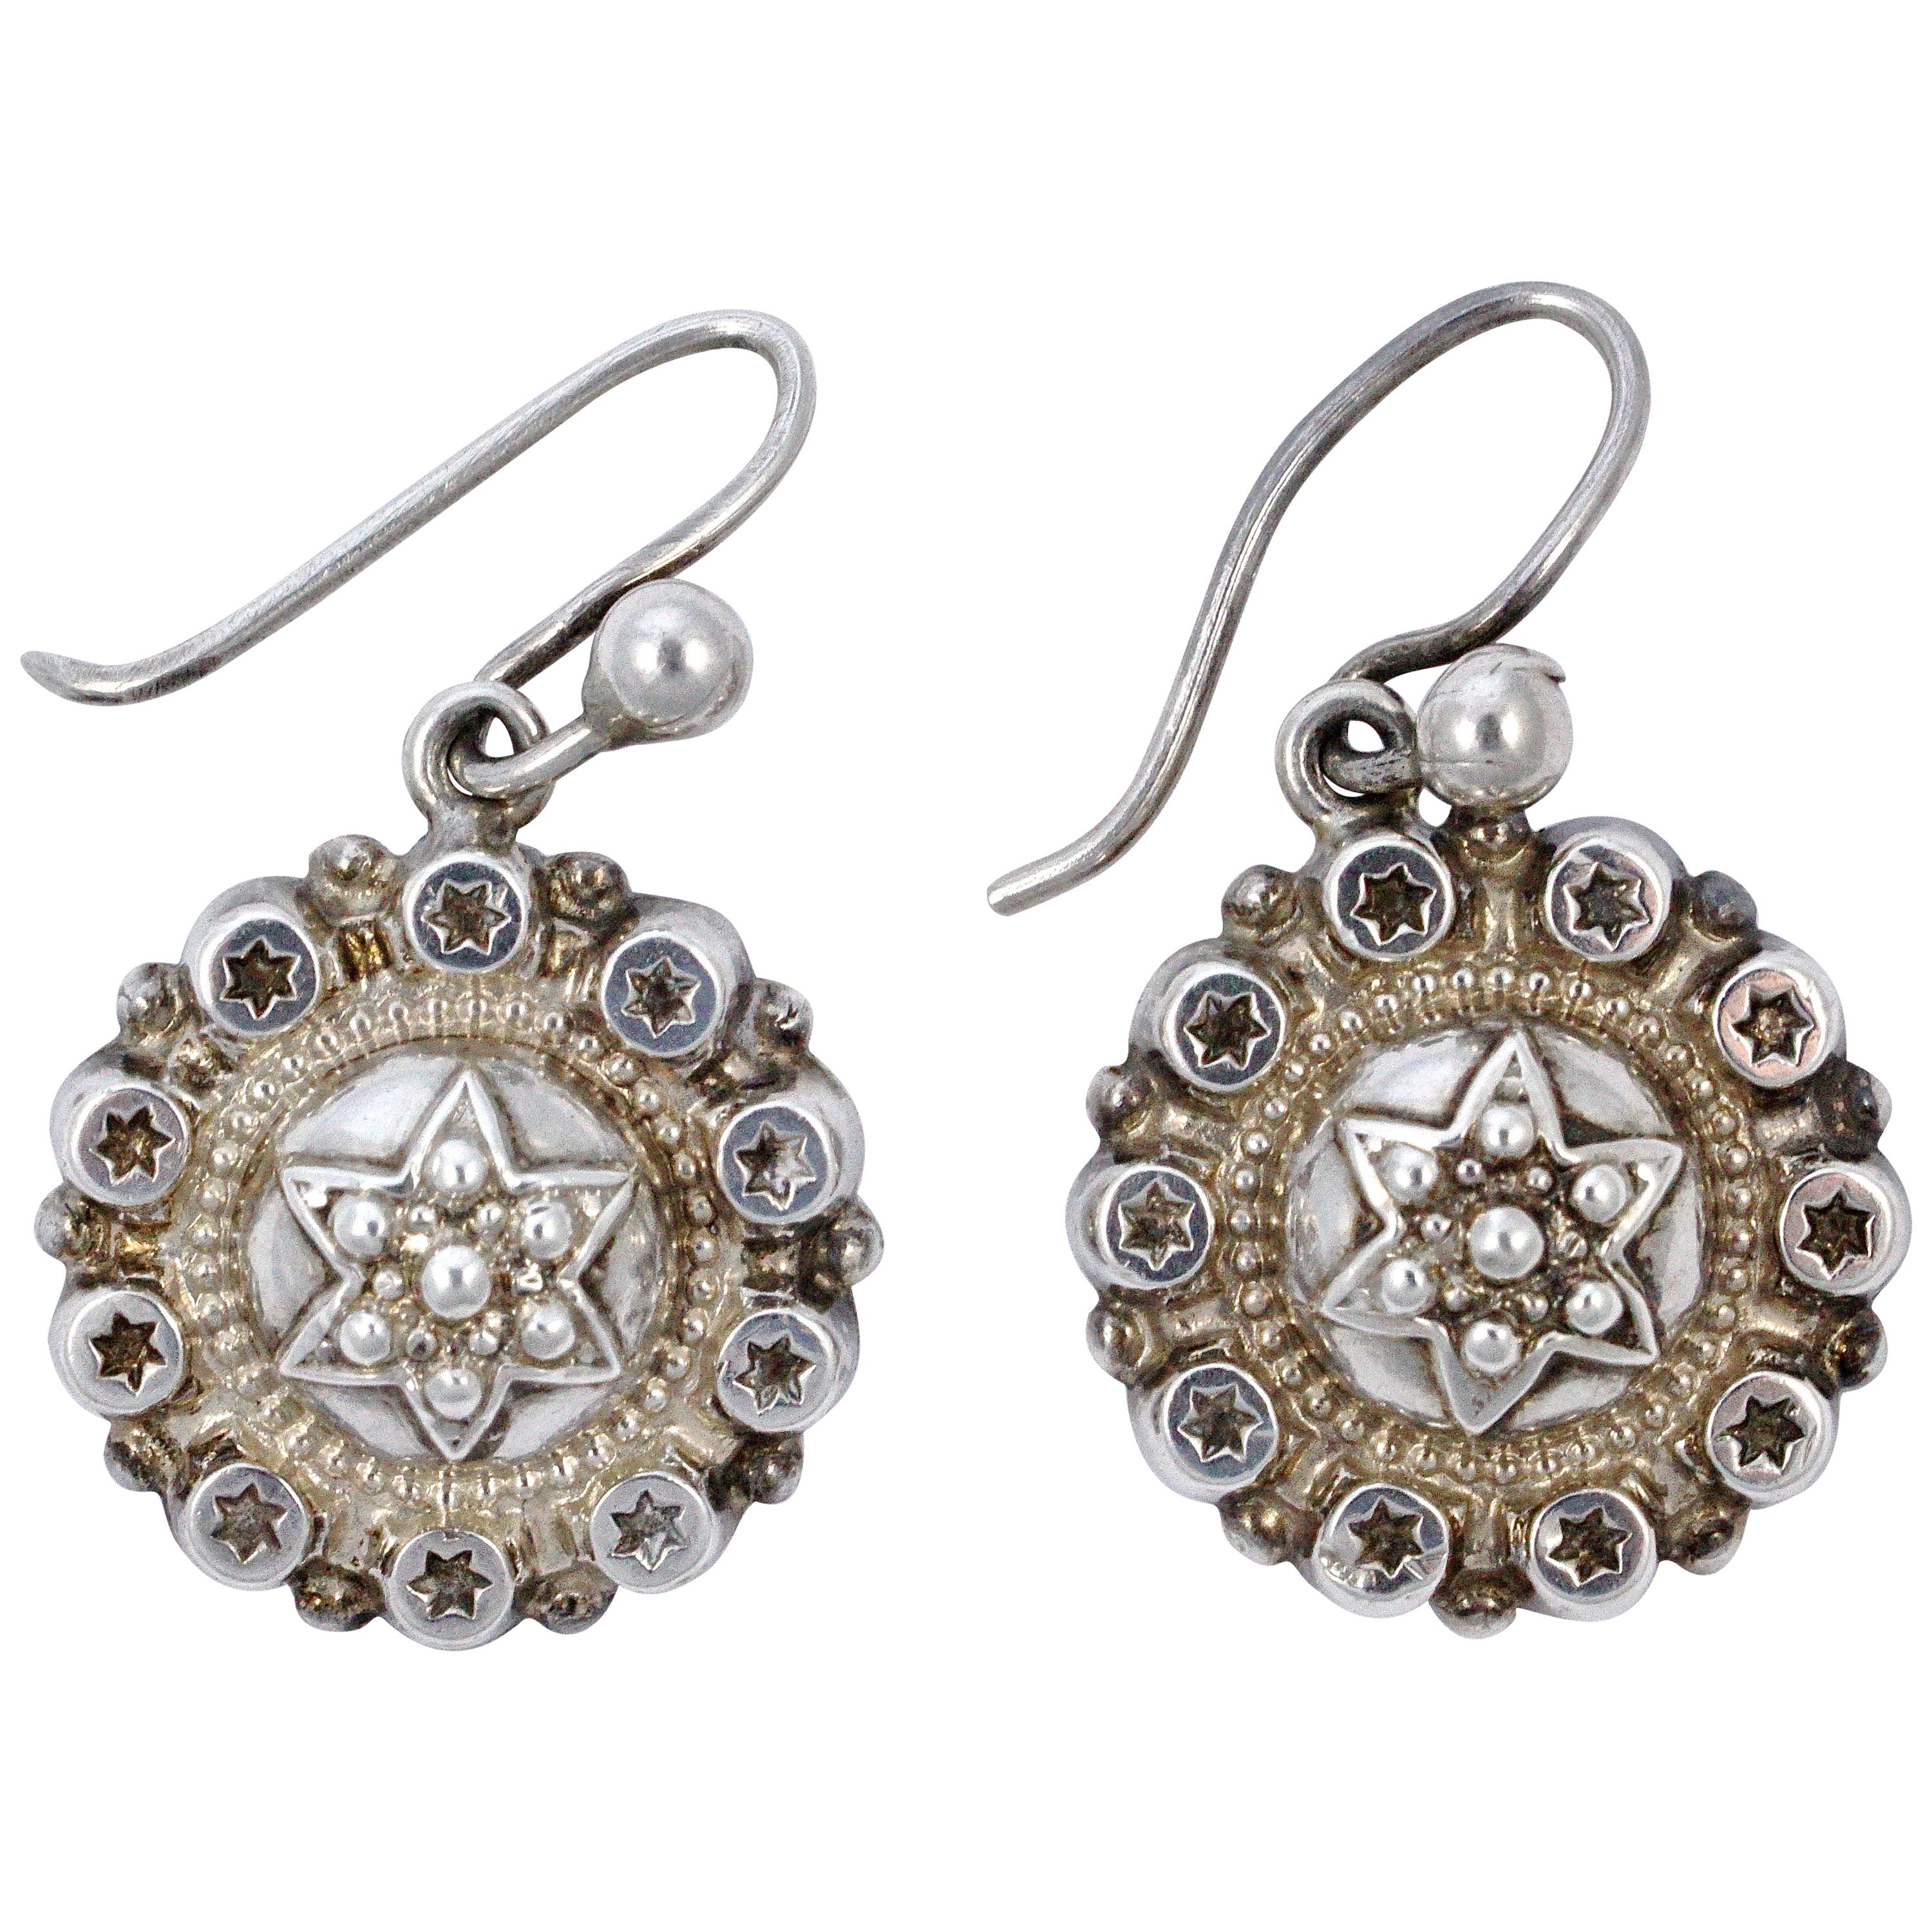 Antique Victorian Round Silver Star Drop Earrings with Gilt Finish